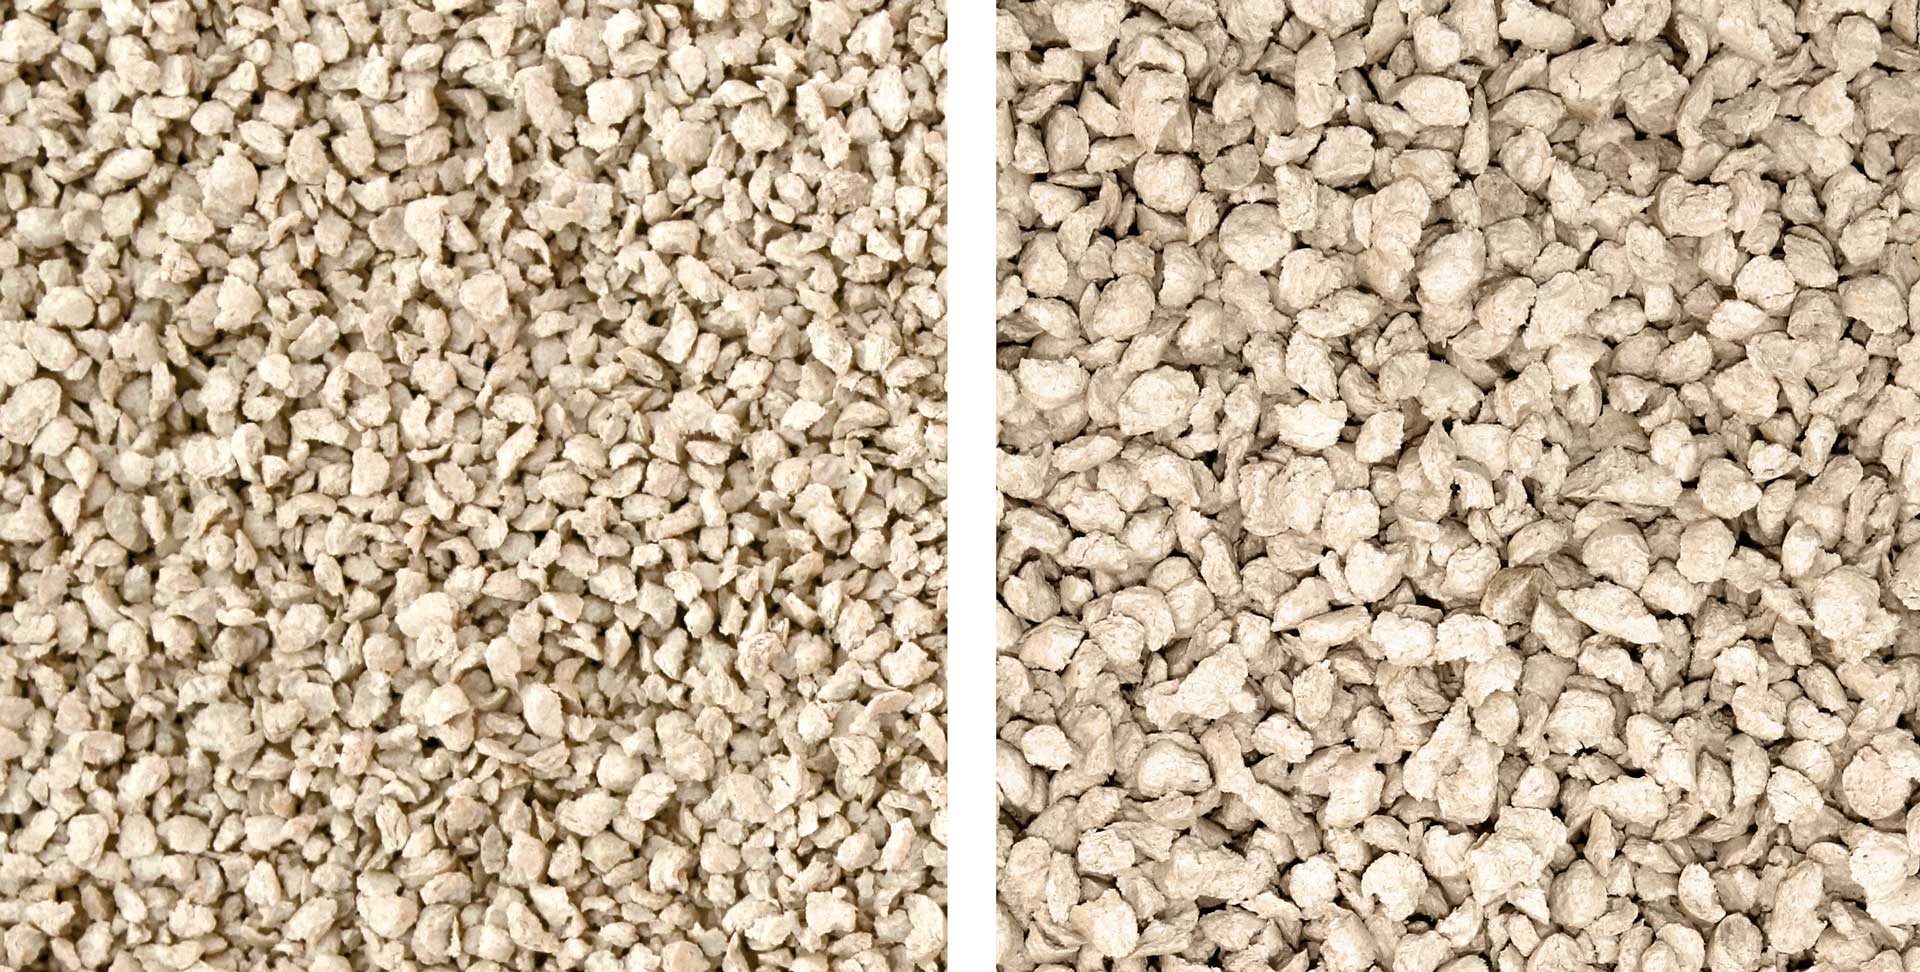 Clumping cat litter in different grain sizes